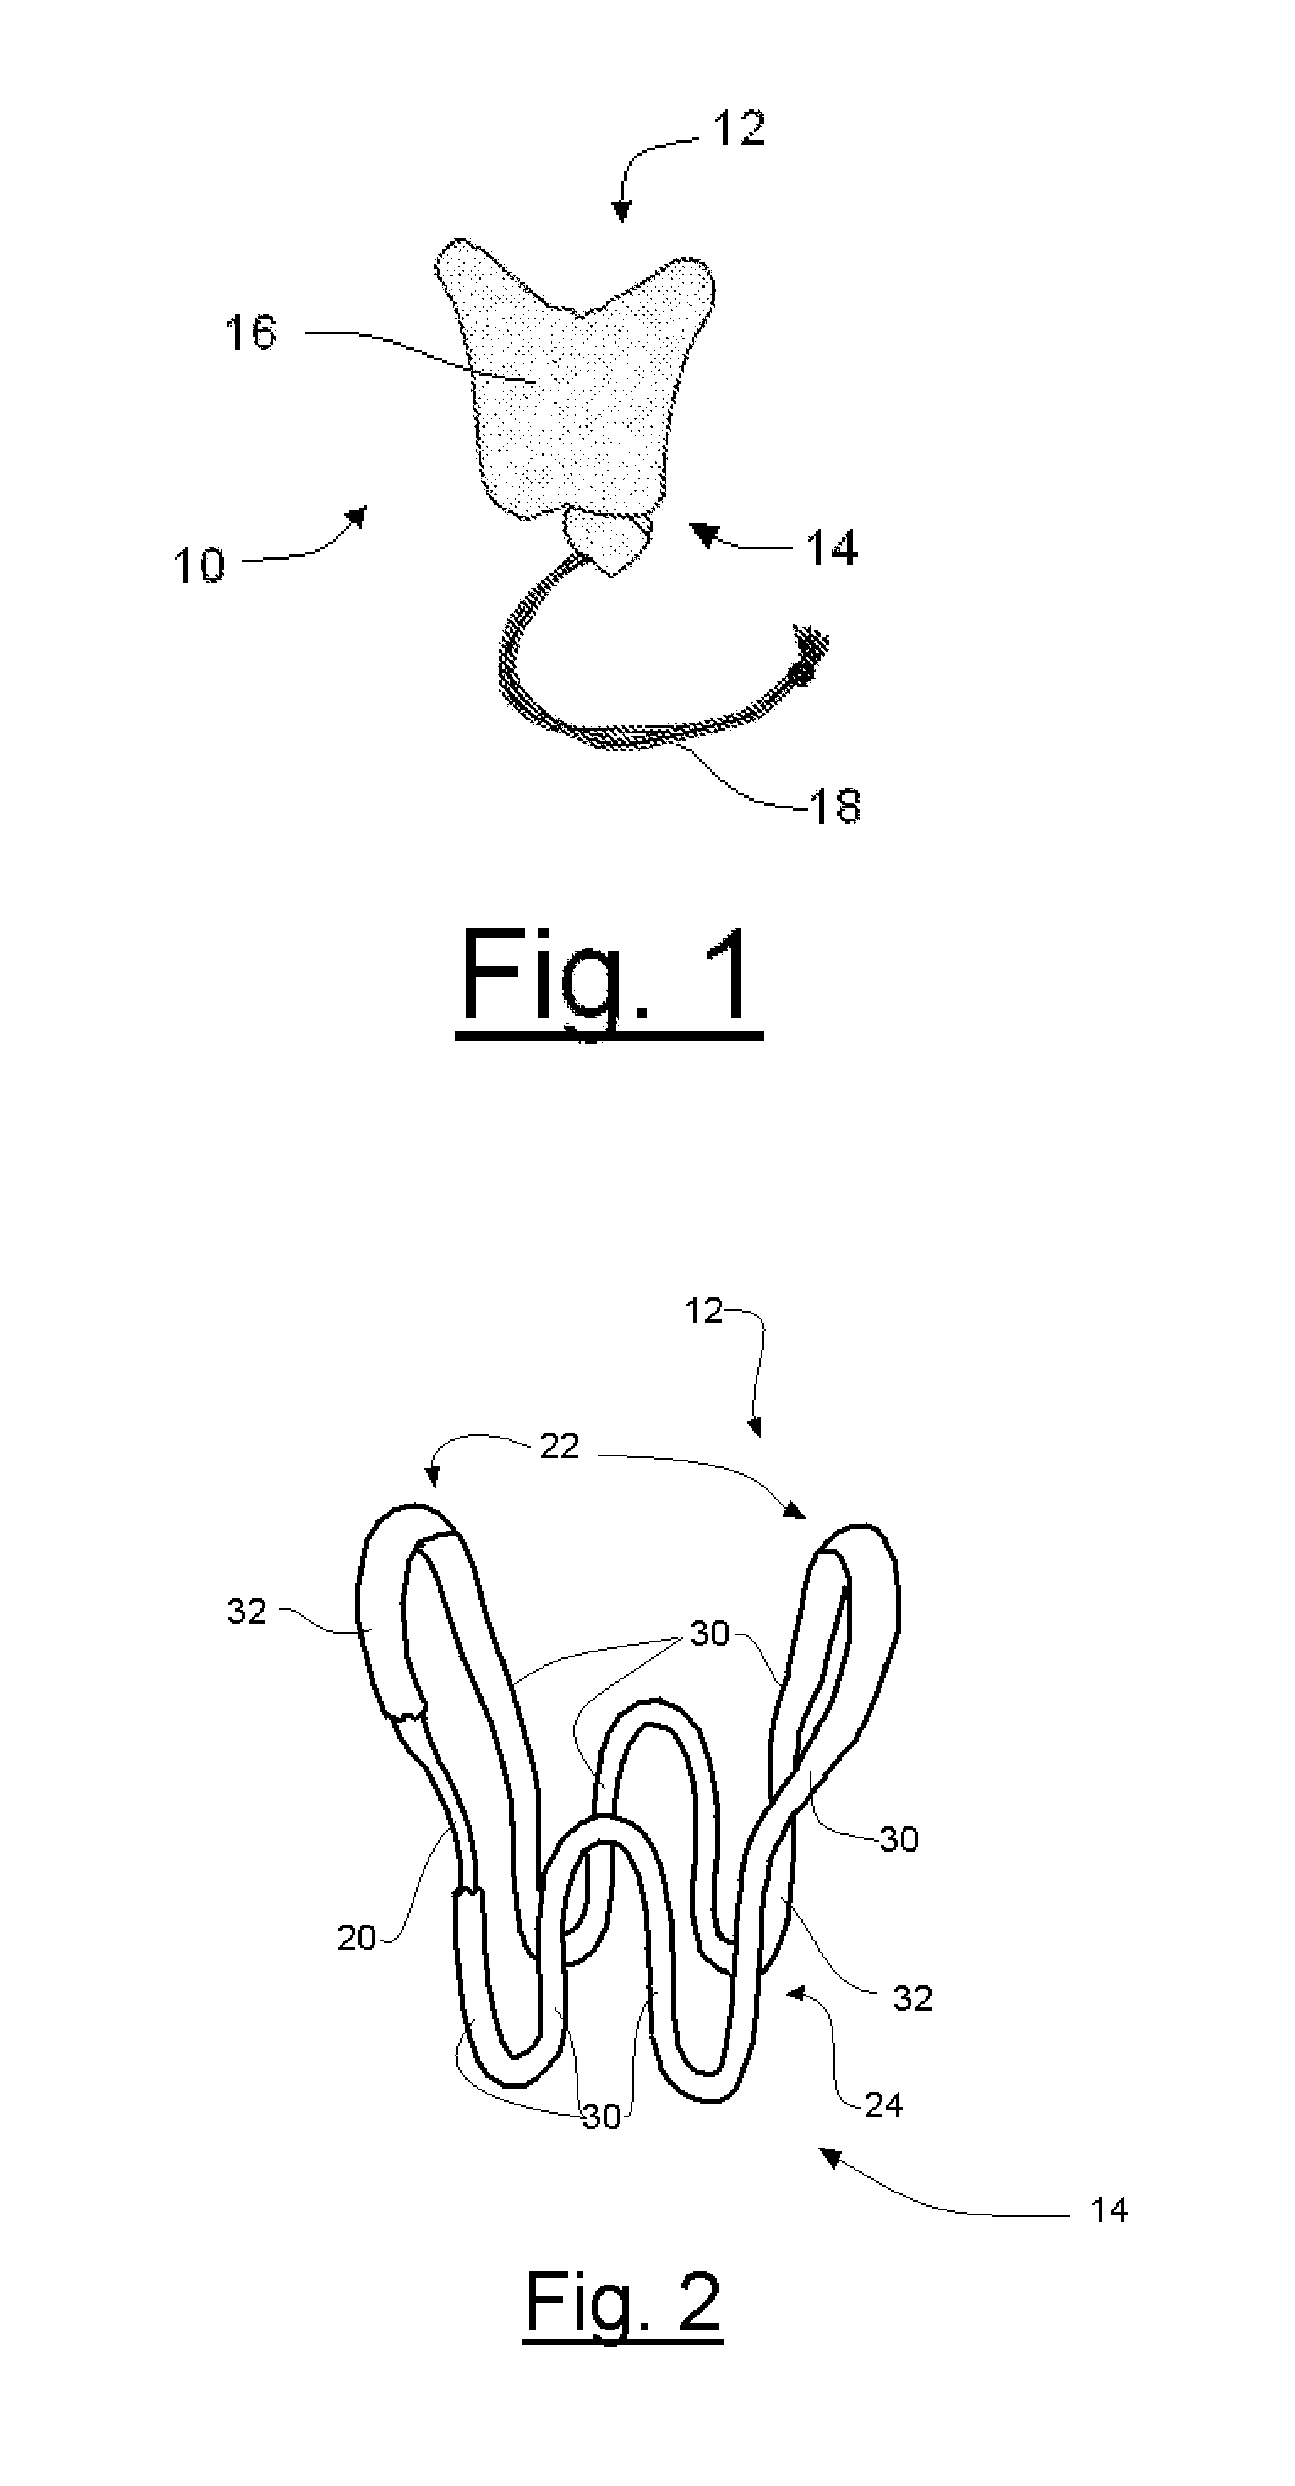 Intravaginal incontinence device